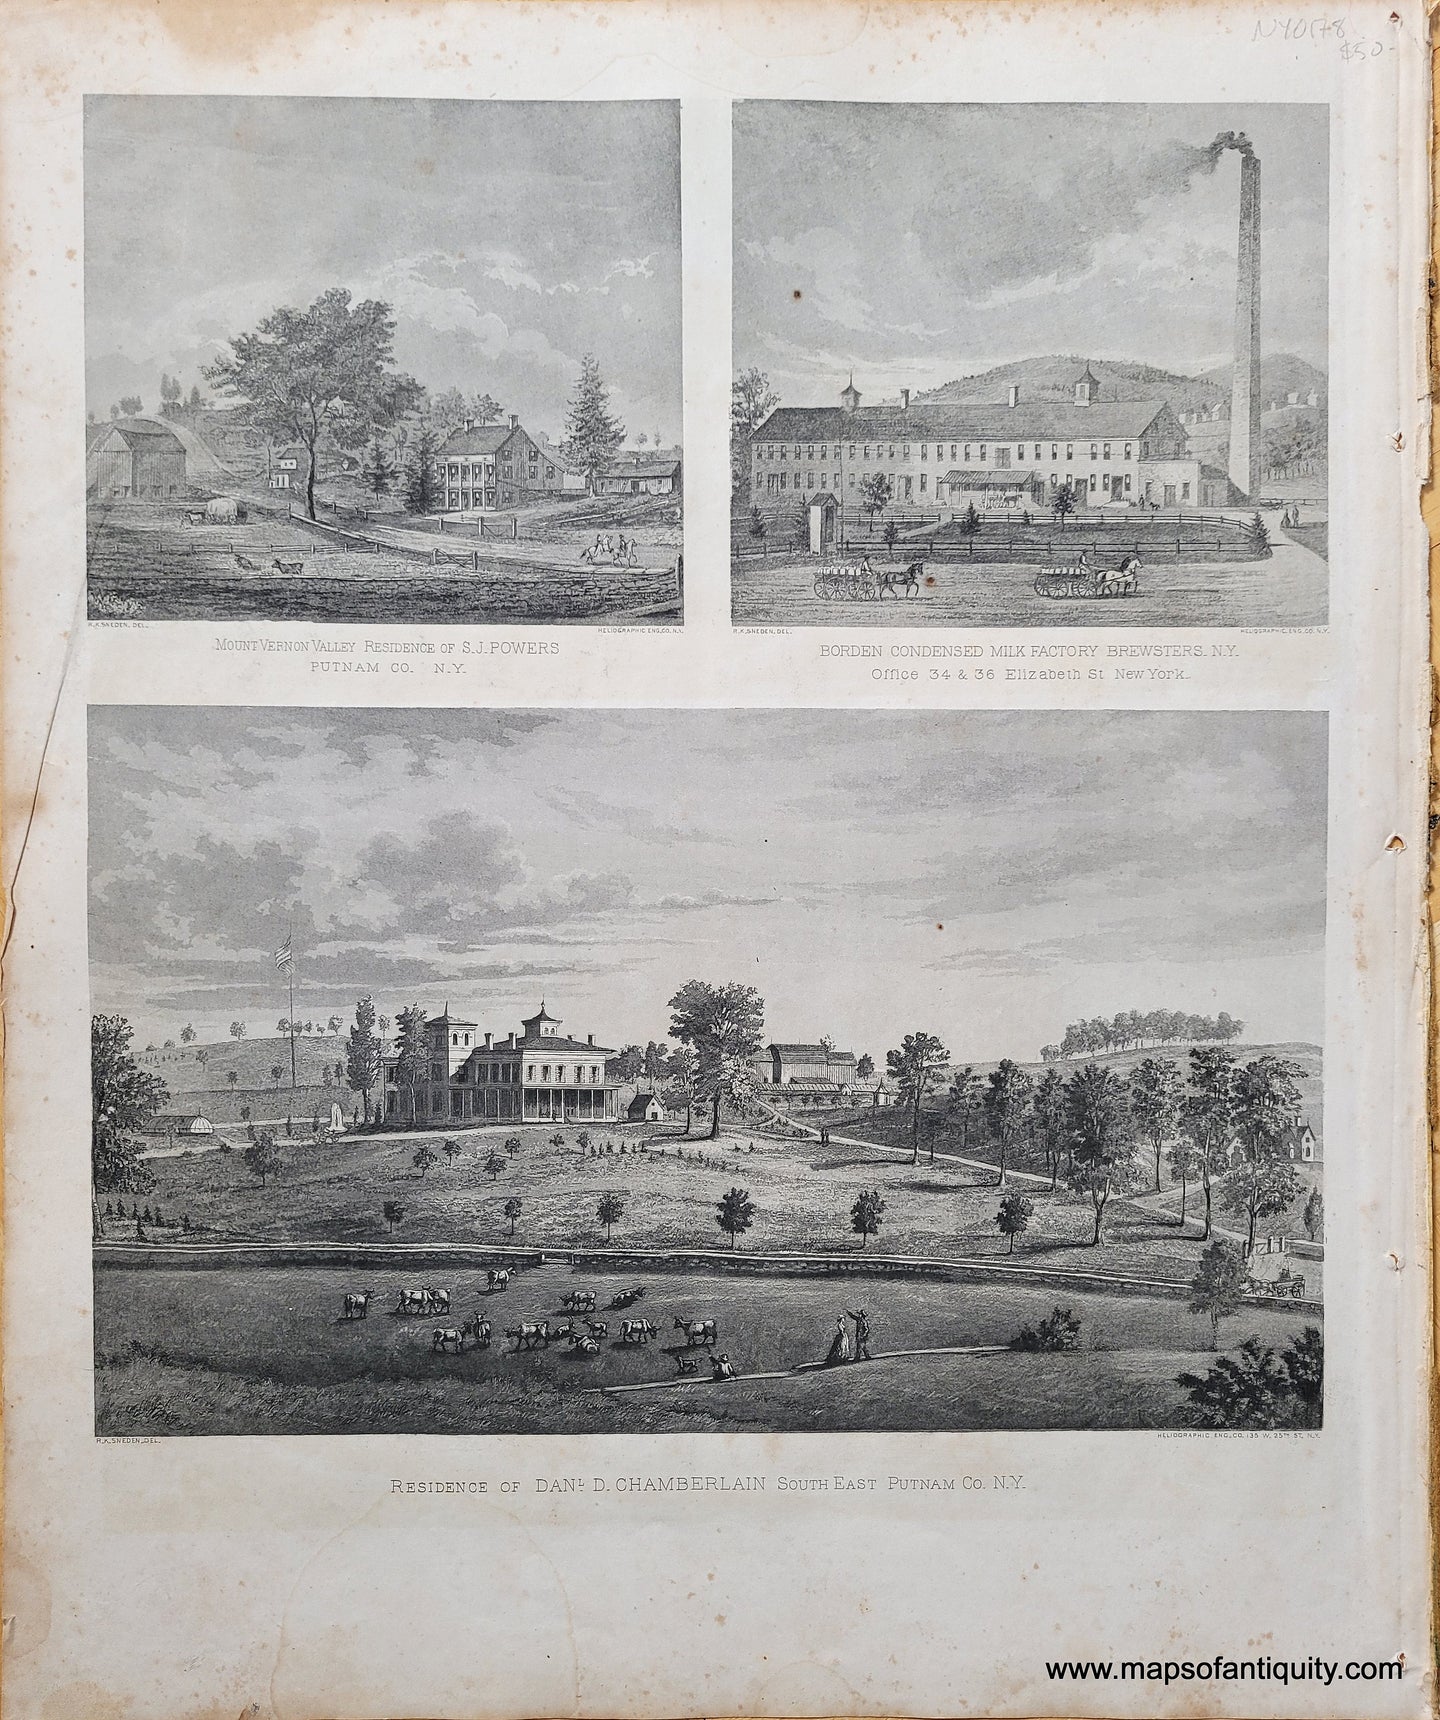 Black-and-White-Antique-Illustration-Residence-of-Danl.-D.-Chamberlain-South-East-Putman-N.Y.-also-Mount-Vernon-Valley-Residence-of-S.J.-Powers-Putman-Co.-N.Y.-and-Borden-Condensed-Milk-Factory-Brewsters-N.Y.--United-States-Northeast-1867-Beers-Maps-Of-Antiquity